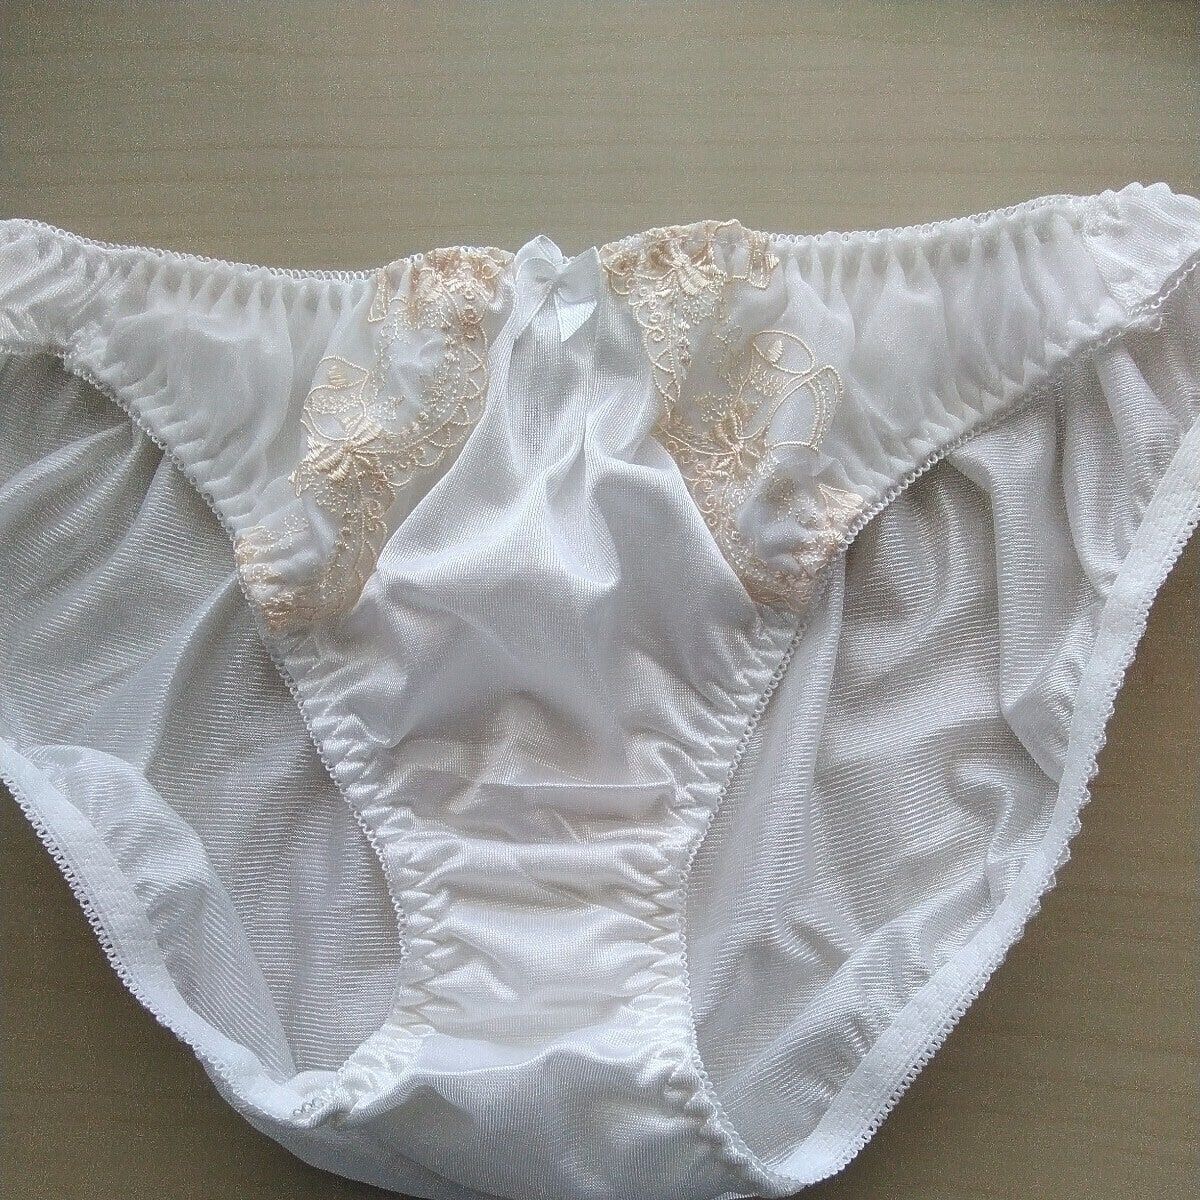 Friend's Panty Collection 2 #28